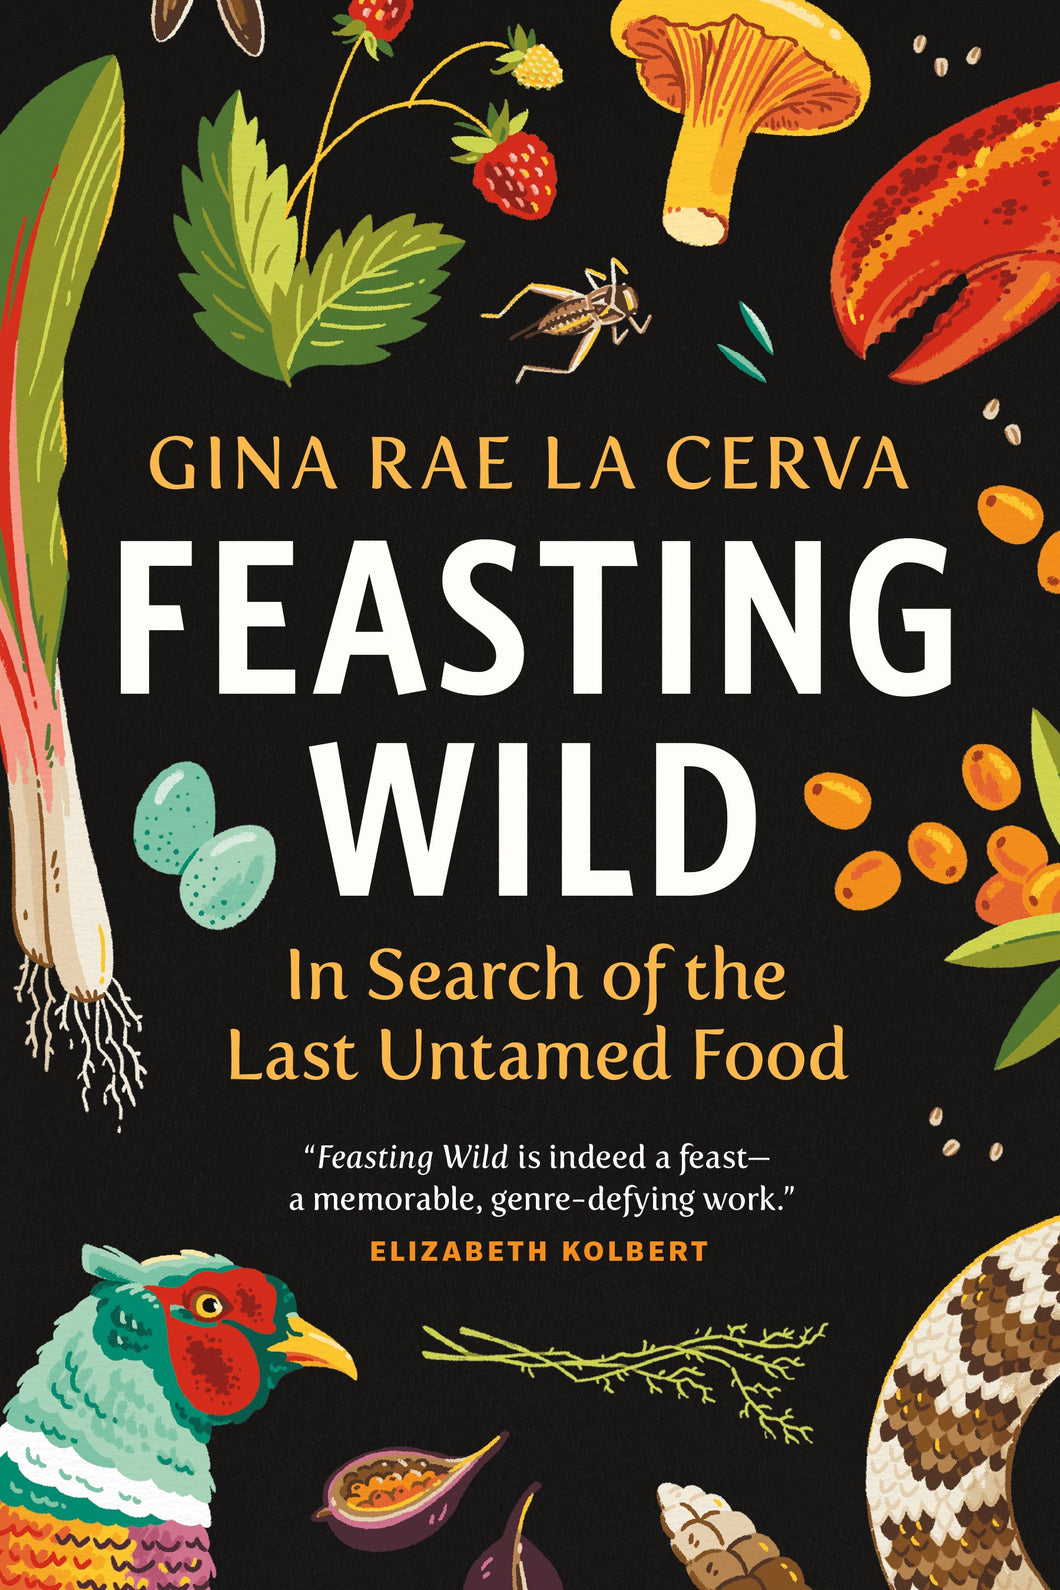 Feasting Wild: In Search of the Last Untamed Food by Gina Rae La Cerva